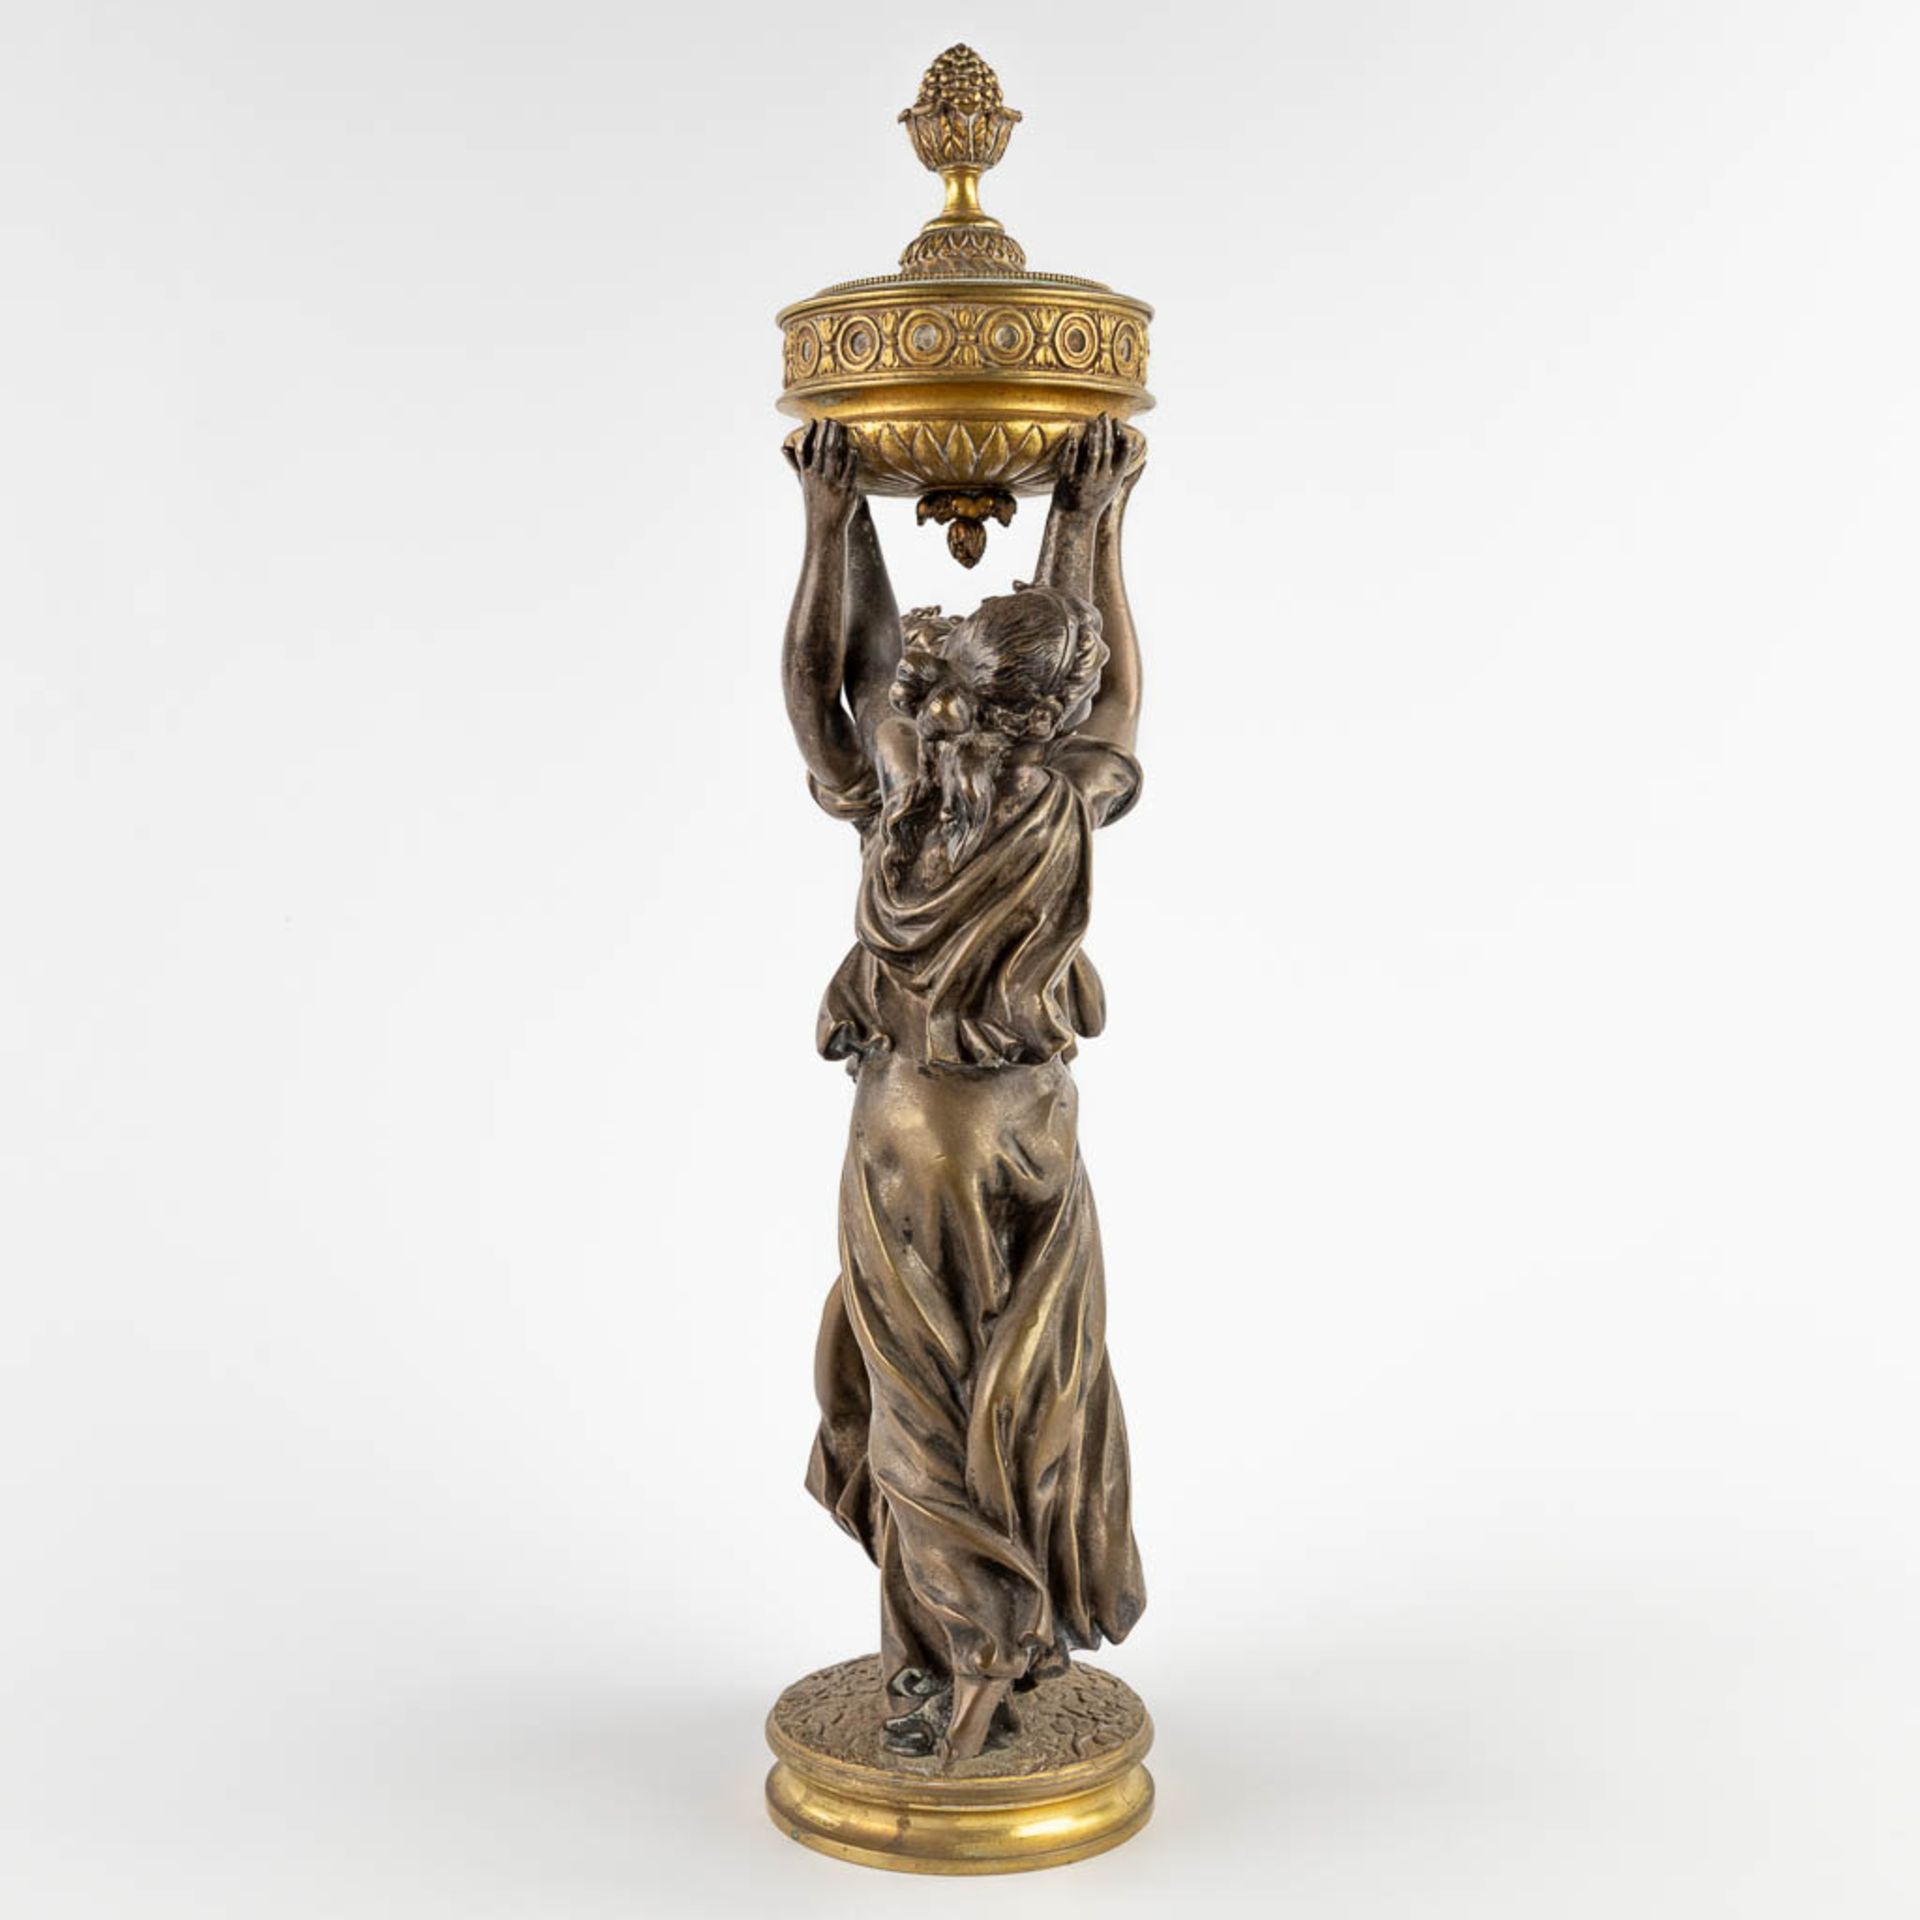 A large figurine of two graces, silver-plated and polished bronze. 19th C. (D:10 x W:18 x H:53 cm) - Image 5 of 11